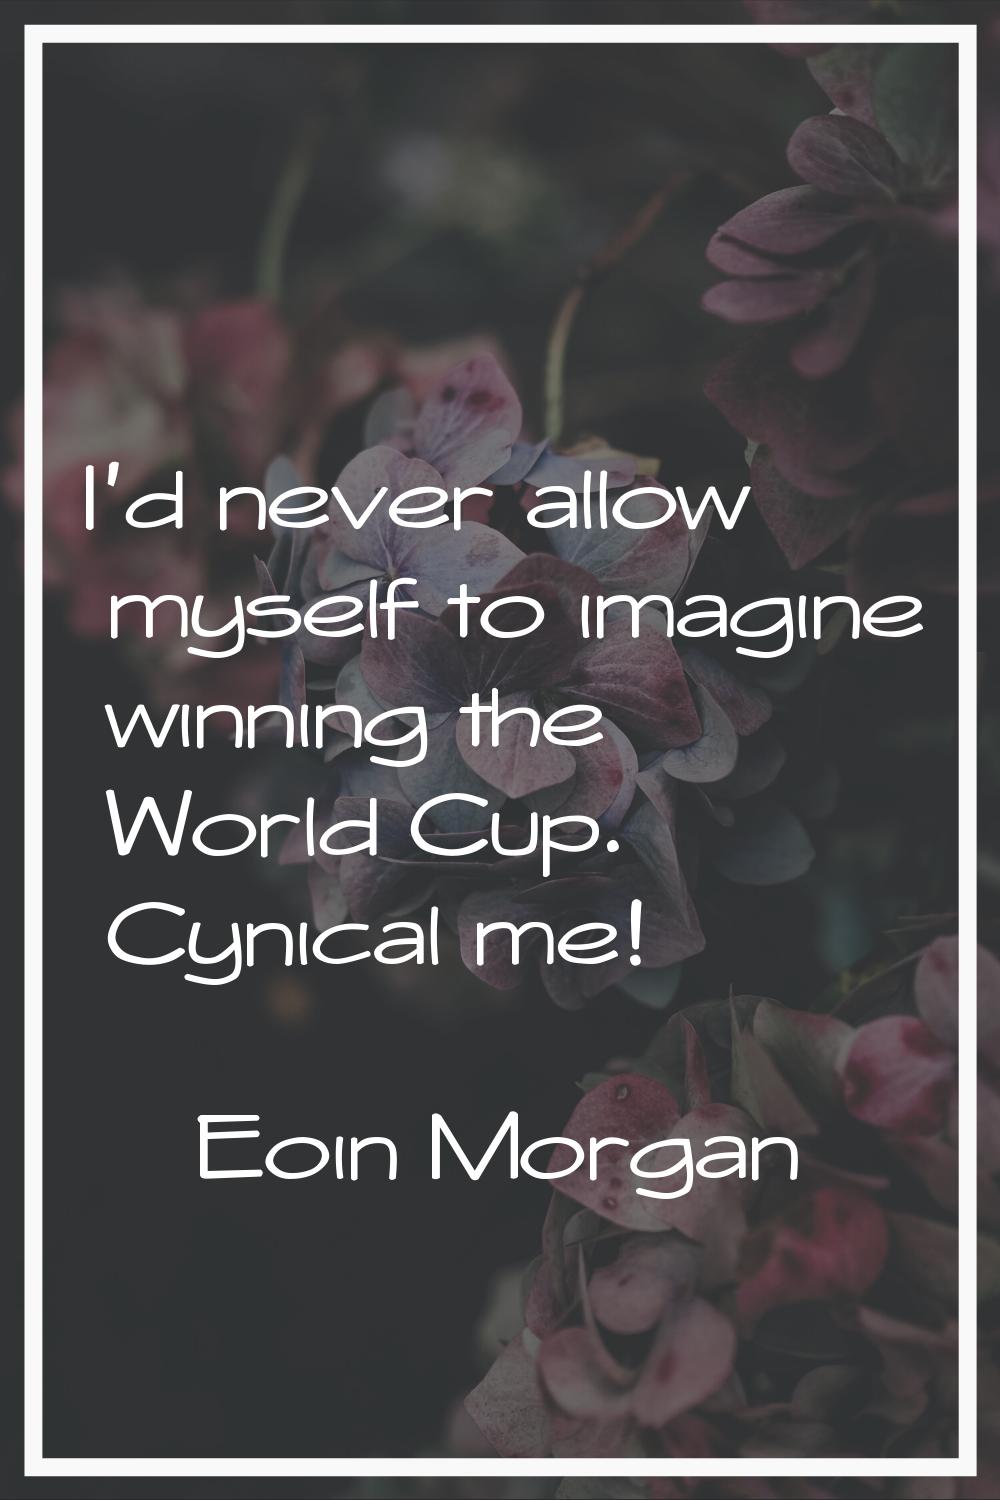 I'd never allow myself to imagine winning the World Cup. Cynical me!